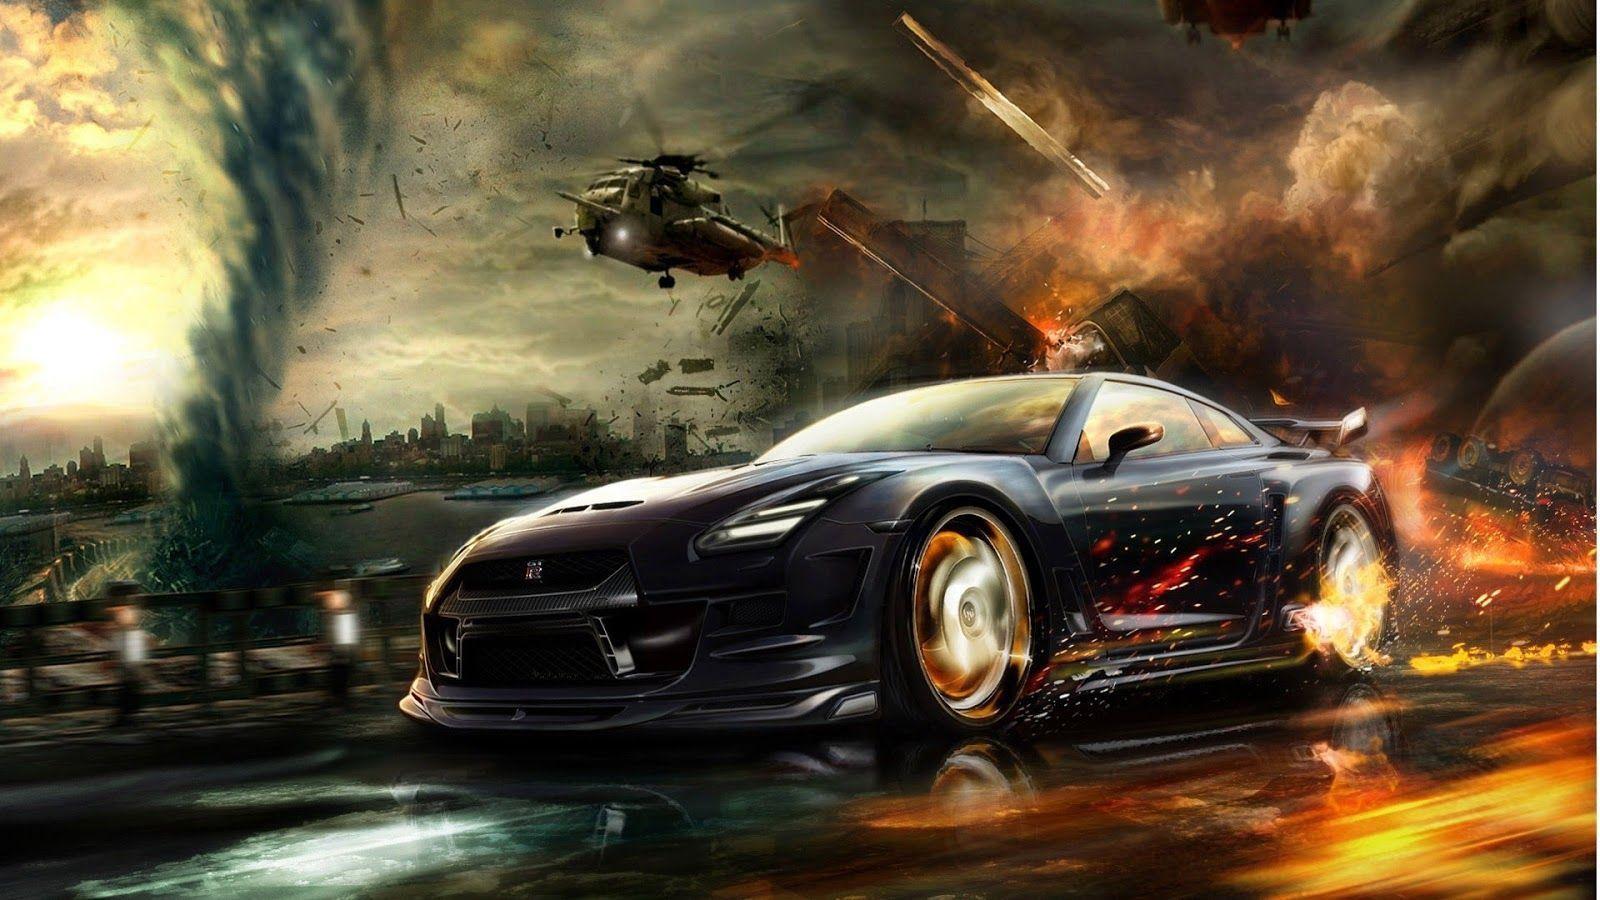 Cool Backgrounds Cars DNAQRO